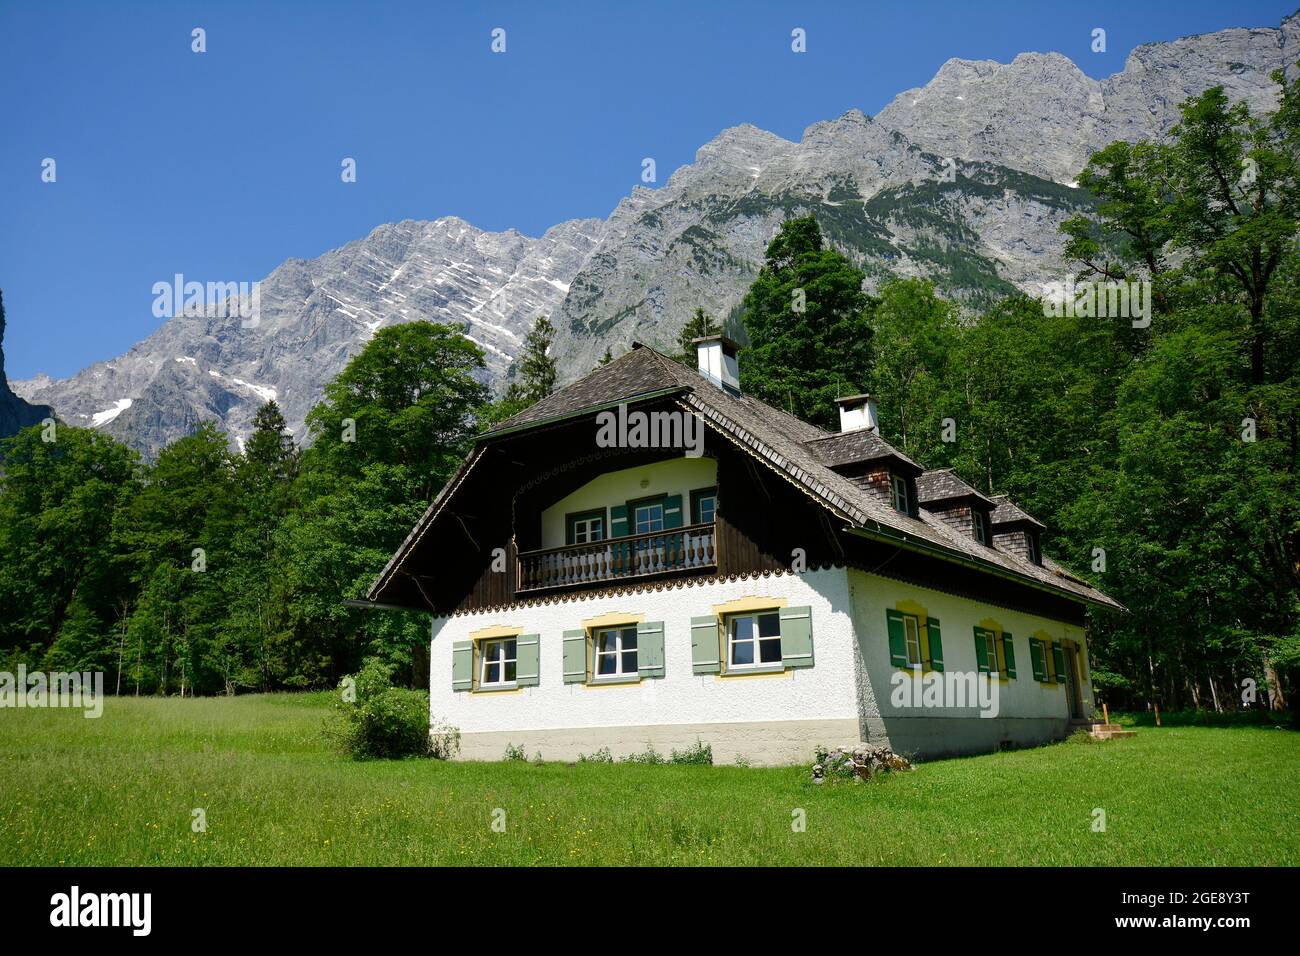 Germany, Bavaria, house near Berchtesgaden in traditional architectural style with the Watzmann Mountains in the background Stock Photo